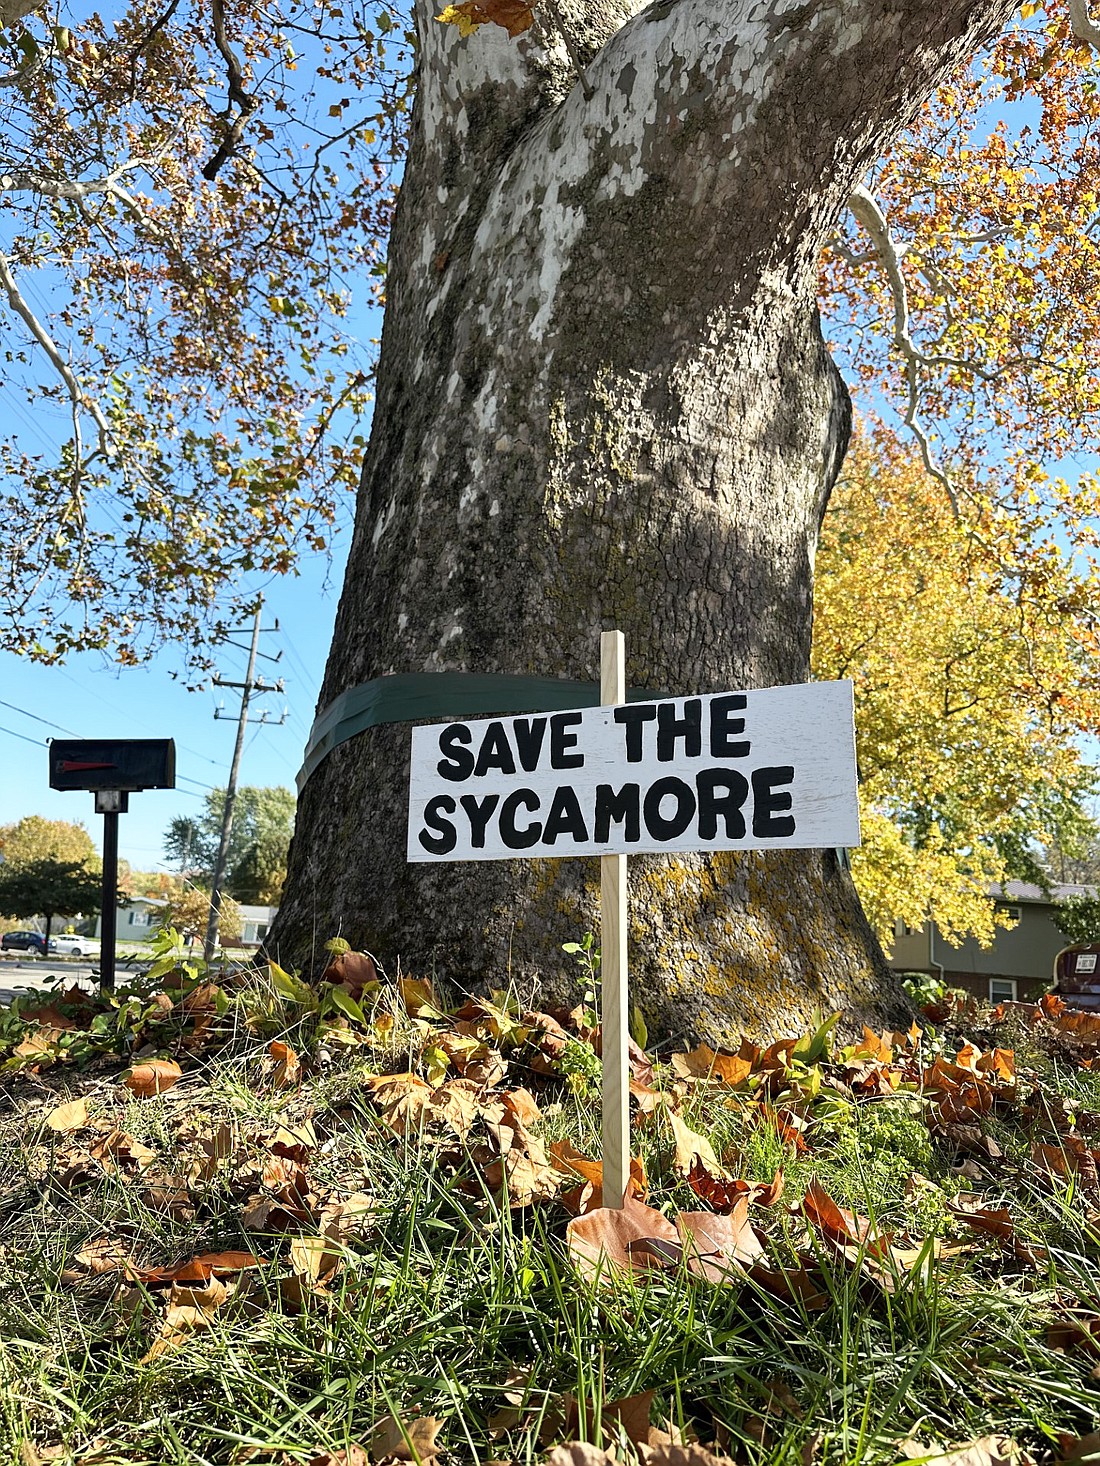 A rally for saving the Sycamore tree at 1702 E. Sheridan St., Warsaw, is scheduled for 11 a.m. to 1:30 p.m. at the site. Photo by David Slone, Times-Union